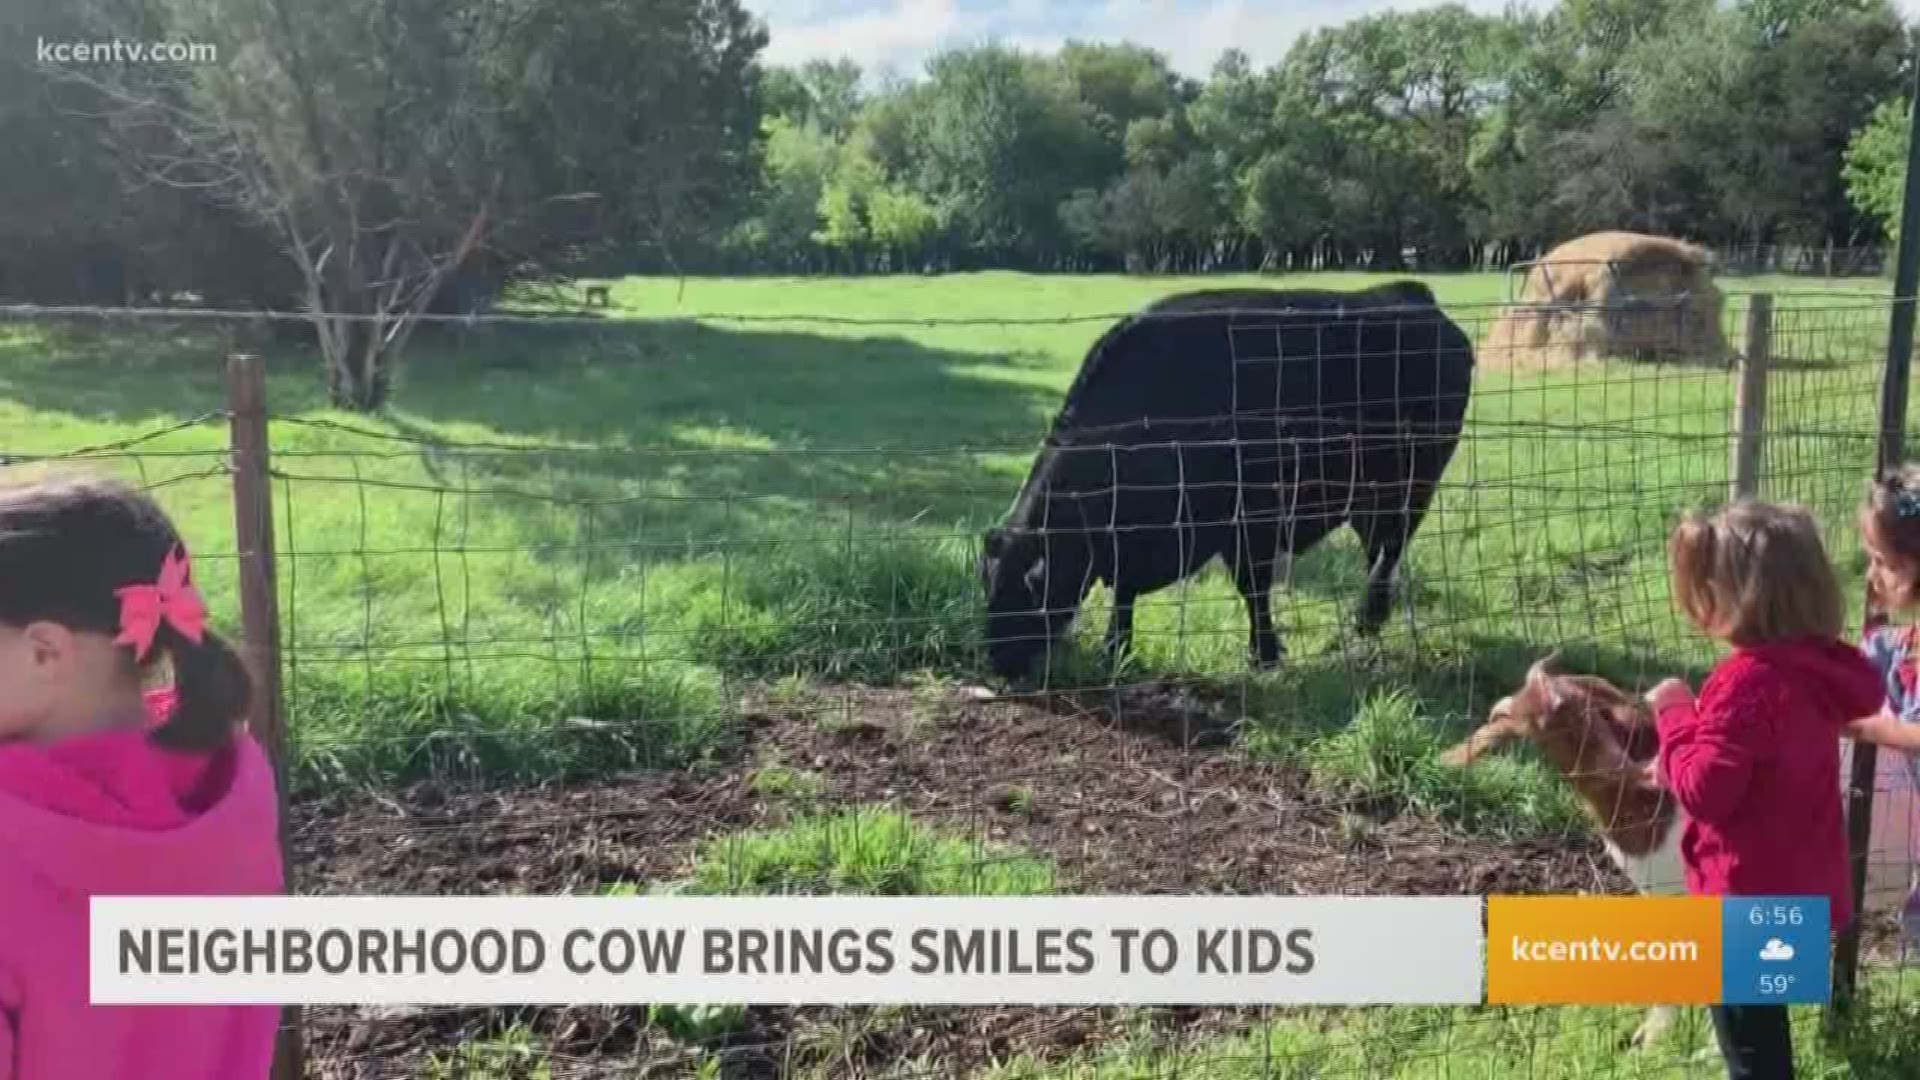 Local cow brings smiles to children in Temple neighborhood.